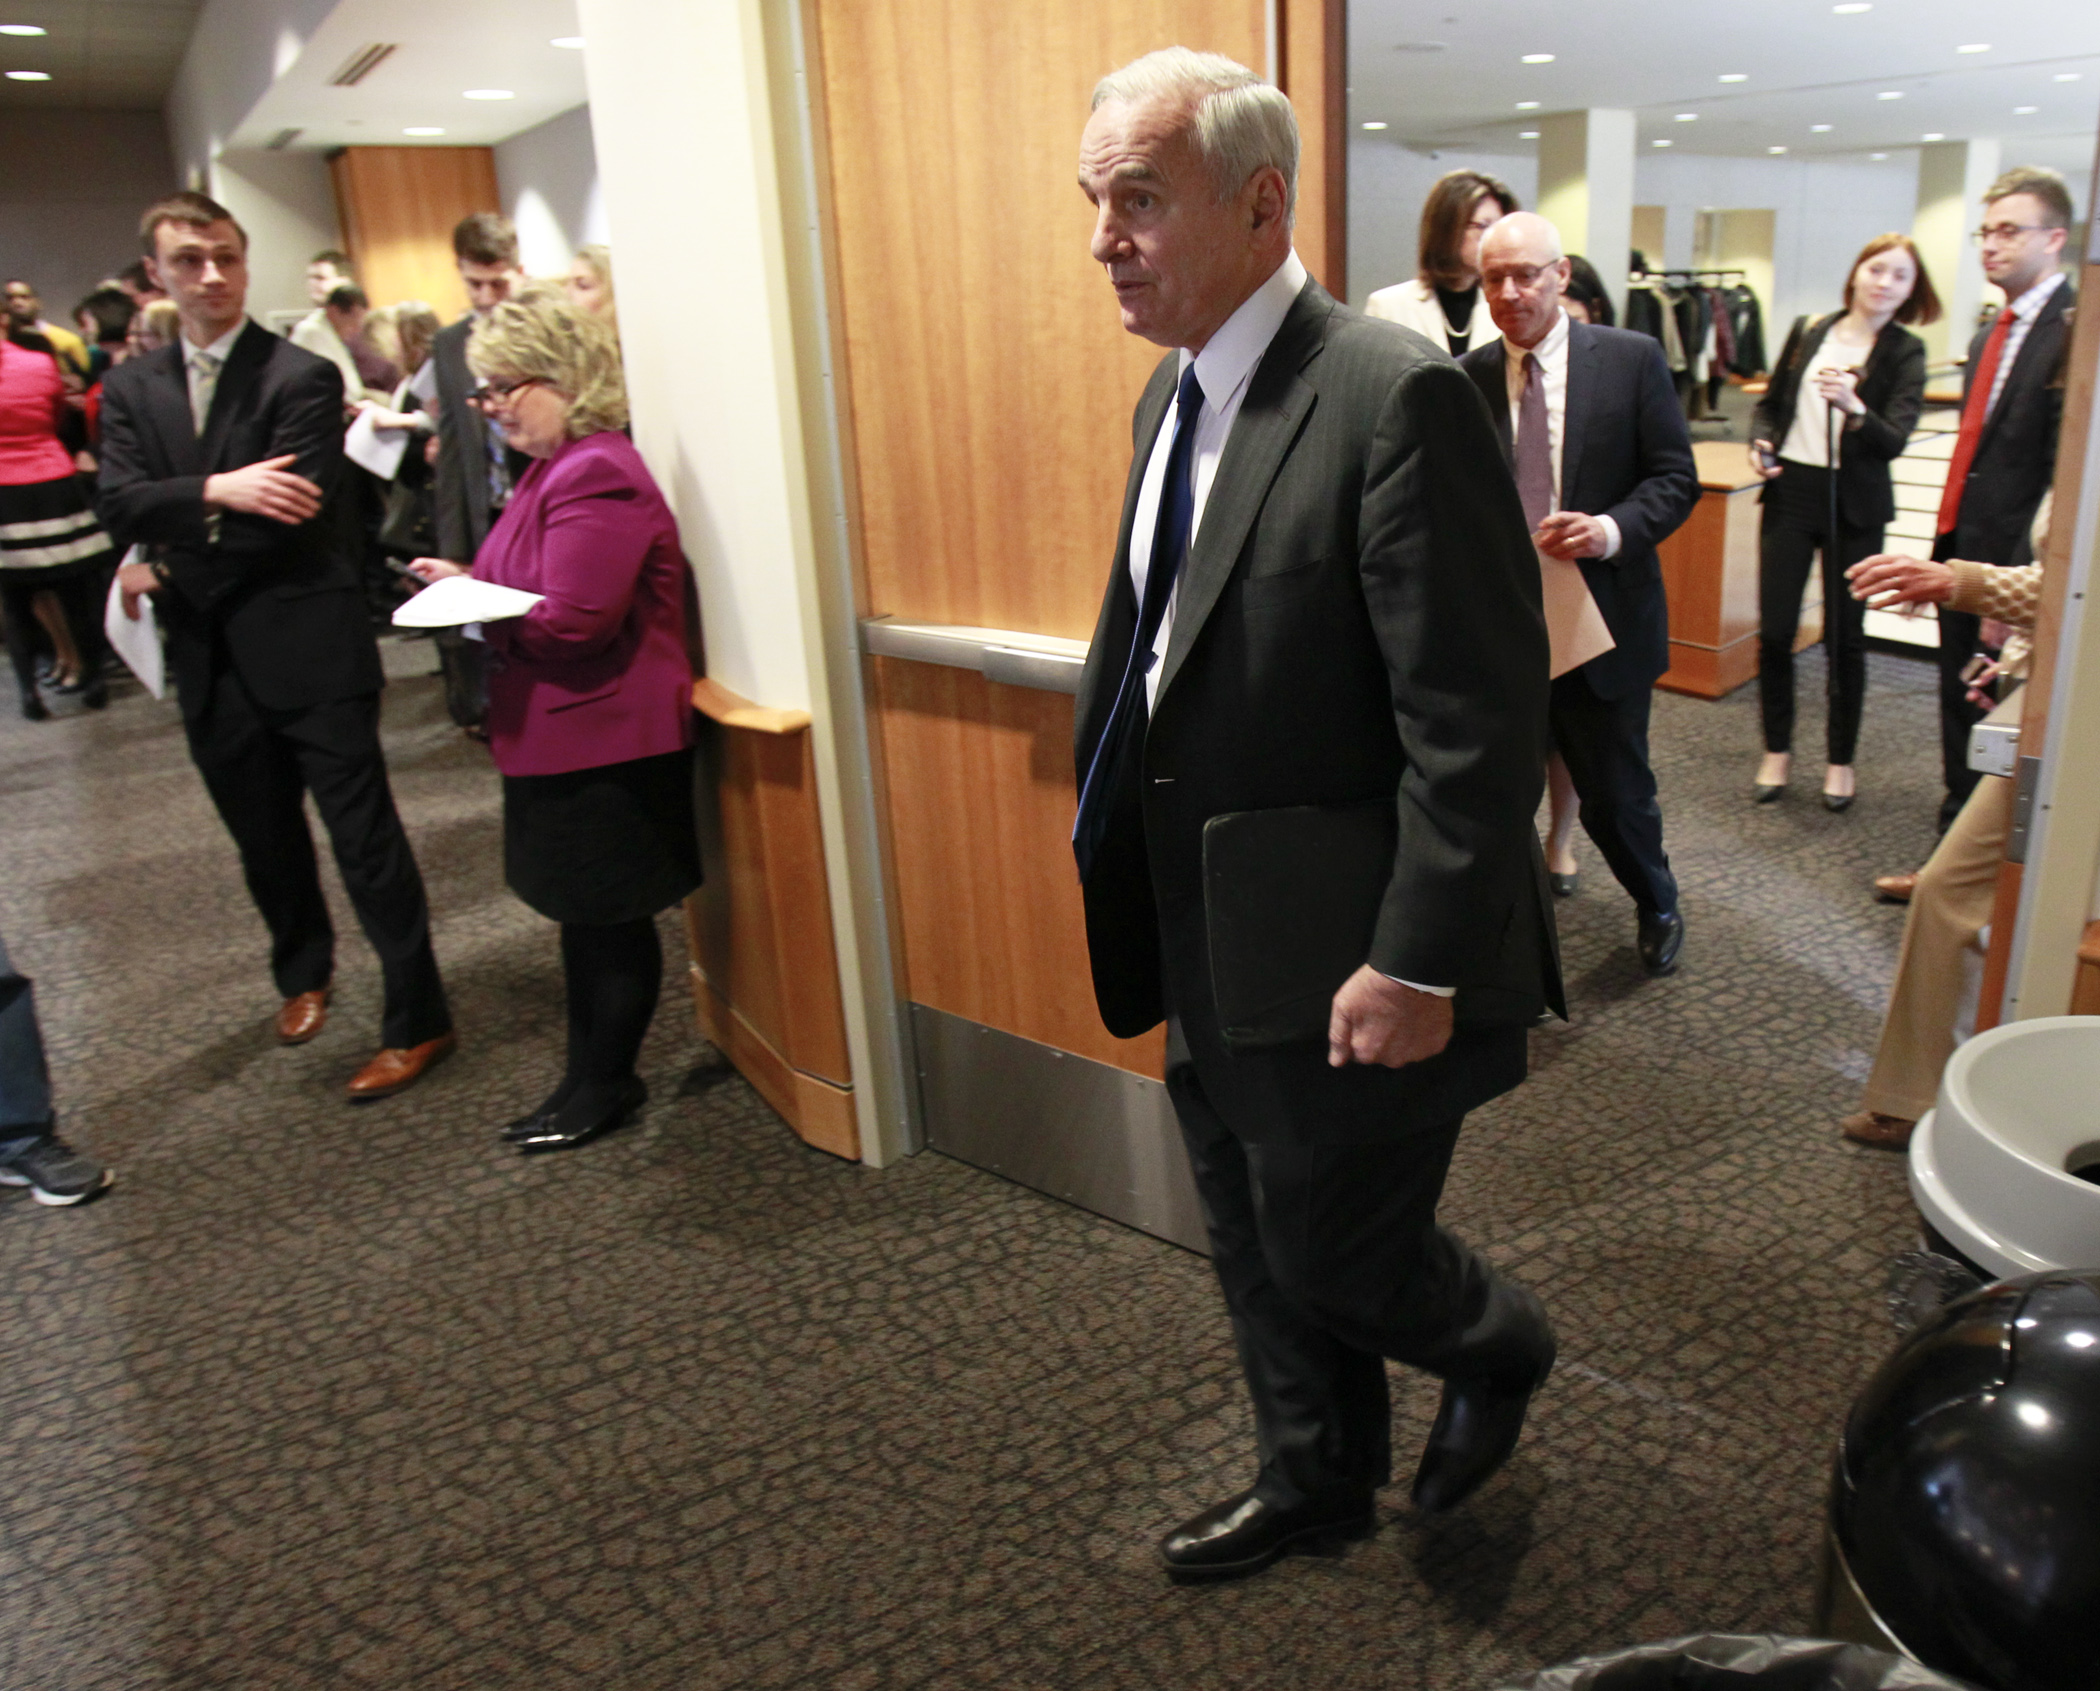 Gov. Mark Dayton enters the room to deliver his biennial budget proposal Jan. 27. Photo by Paul Battaglia